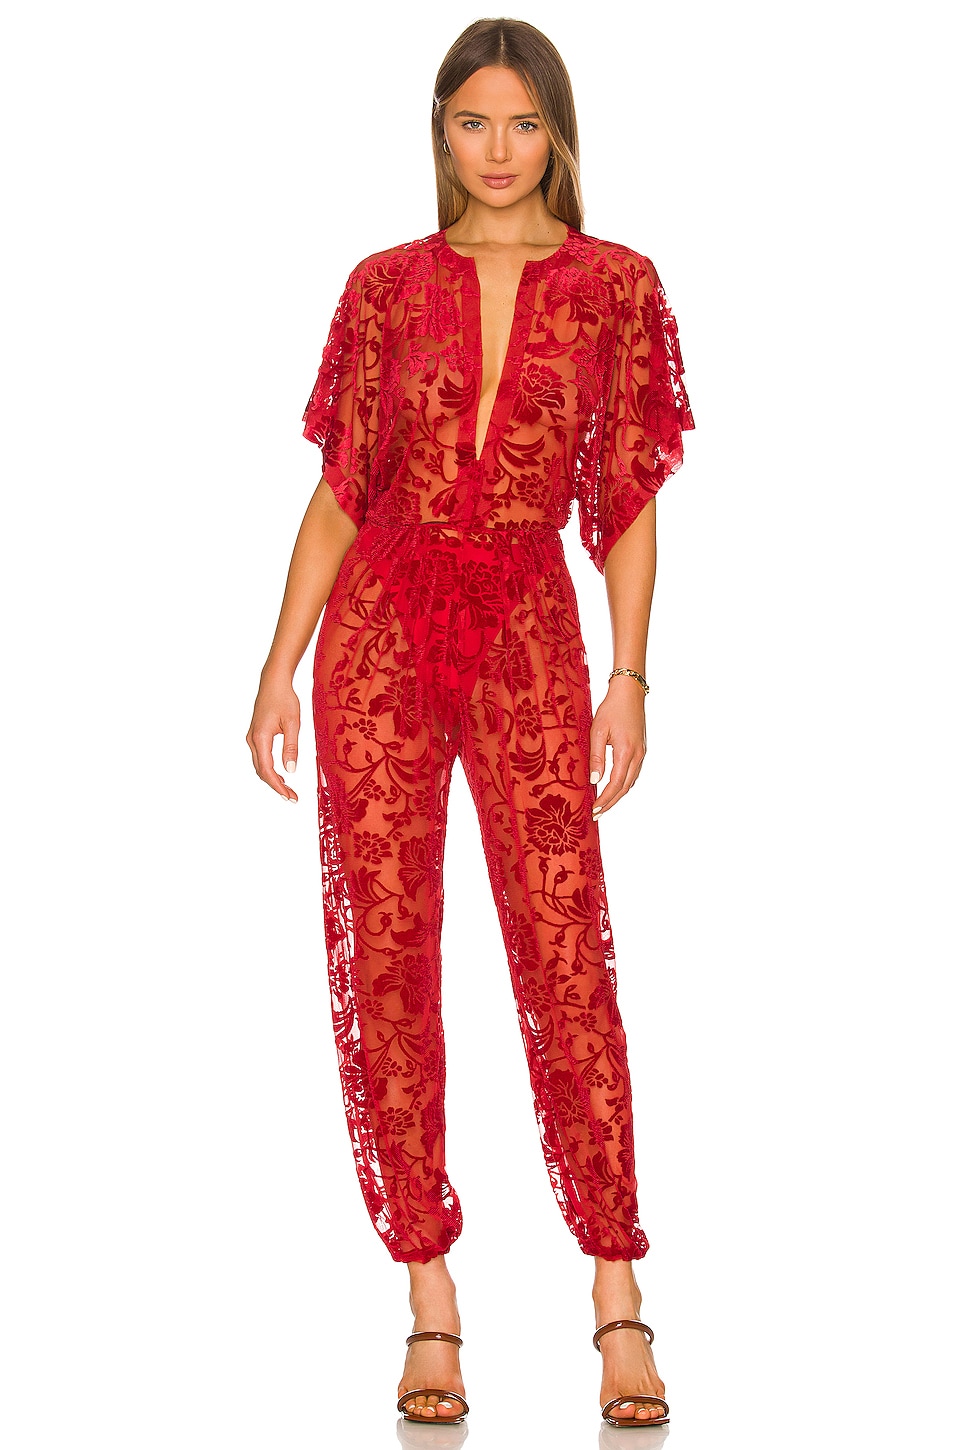 Red Designer Jumpsuit with Floral Lace Design and Sheer Mesh Fabric for Evening